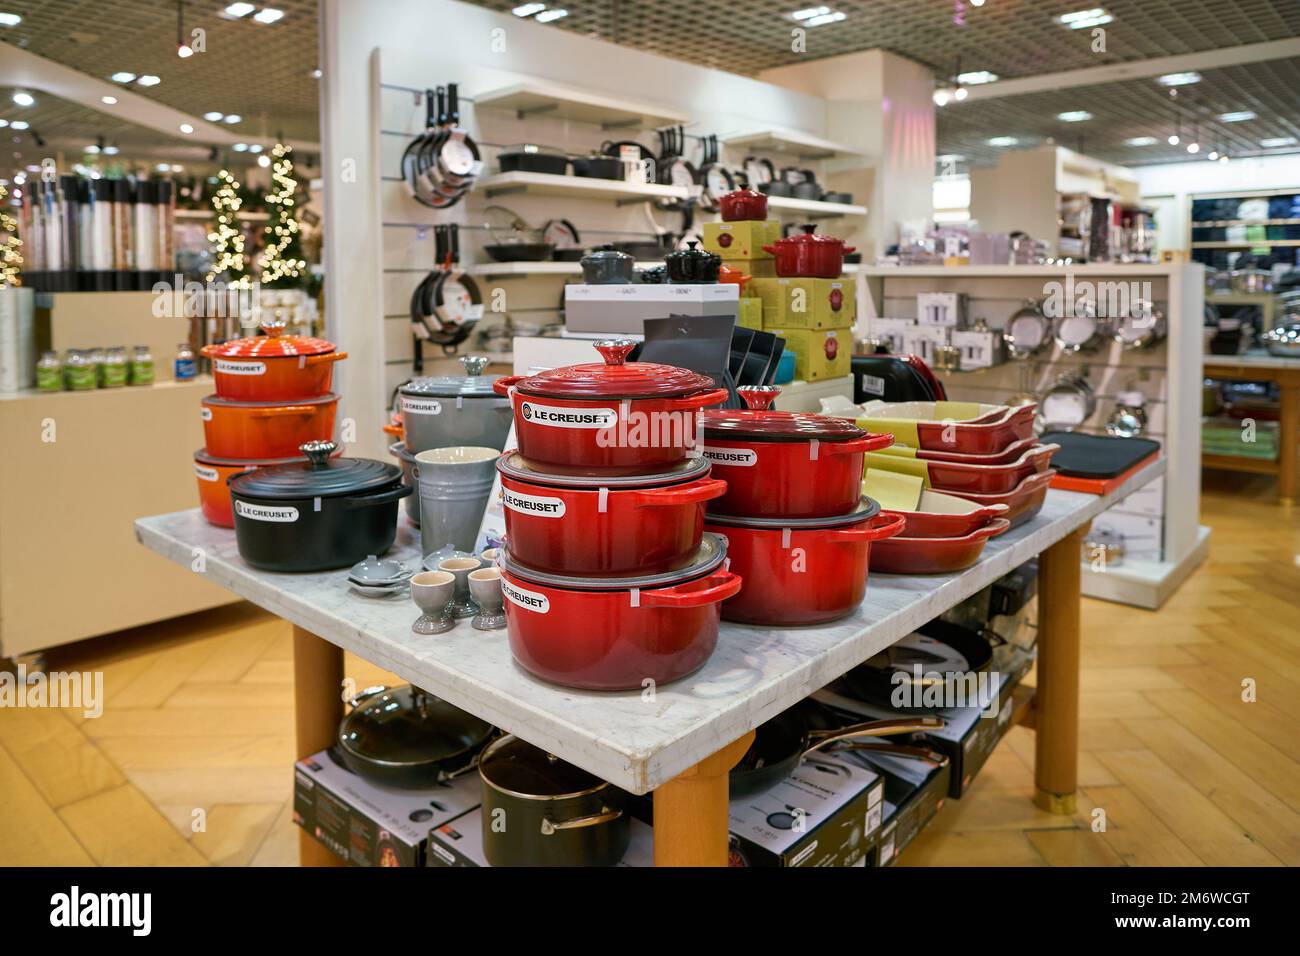 https://c8.alamy.com/comp/2M6WCGT/rome-italy-circa-november-2017-le-creuset-cookware-displayed-at-rinascente-store-in-rome-2M6WCGT.jpg